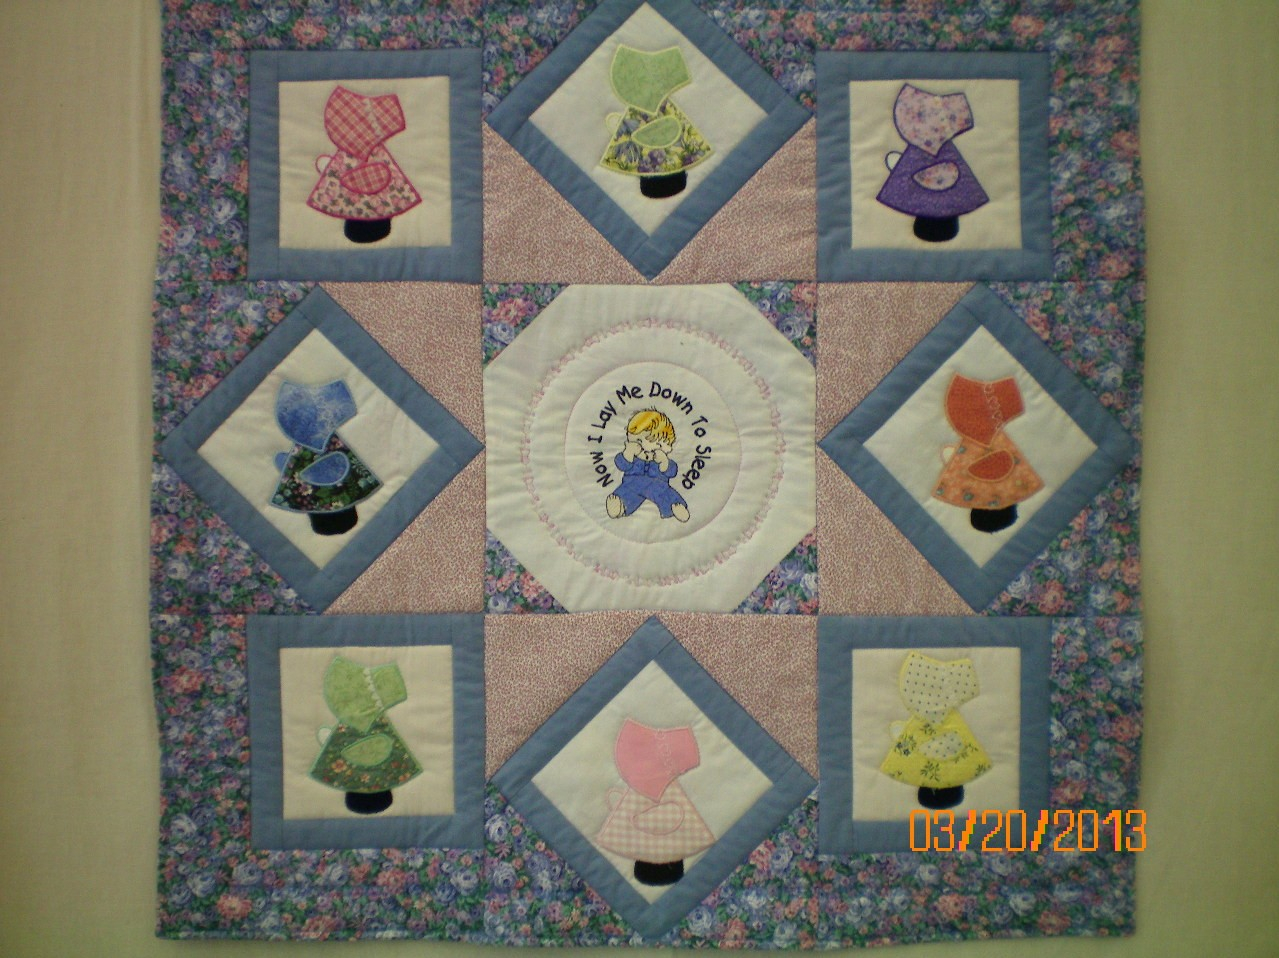 Sunbonnet Sue Embroidery Patterns Free Embroidery Designs Cute Embroidery Designs